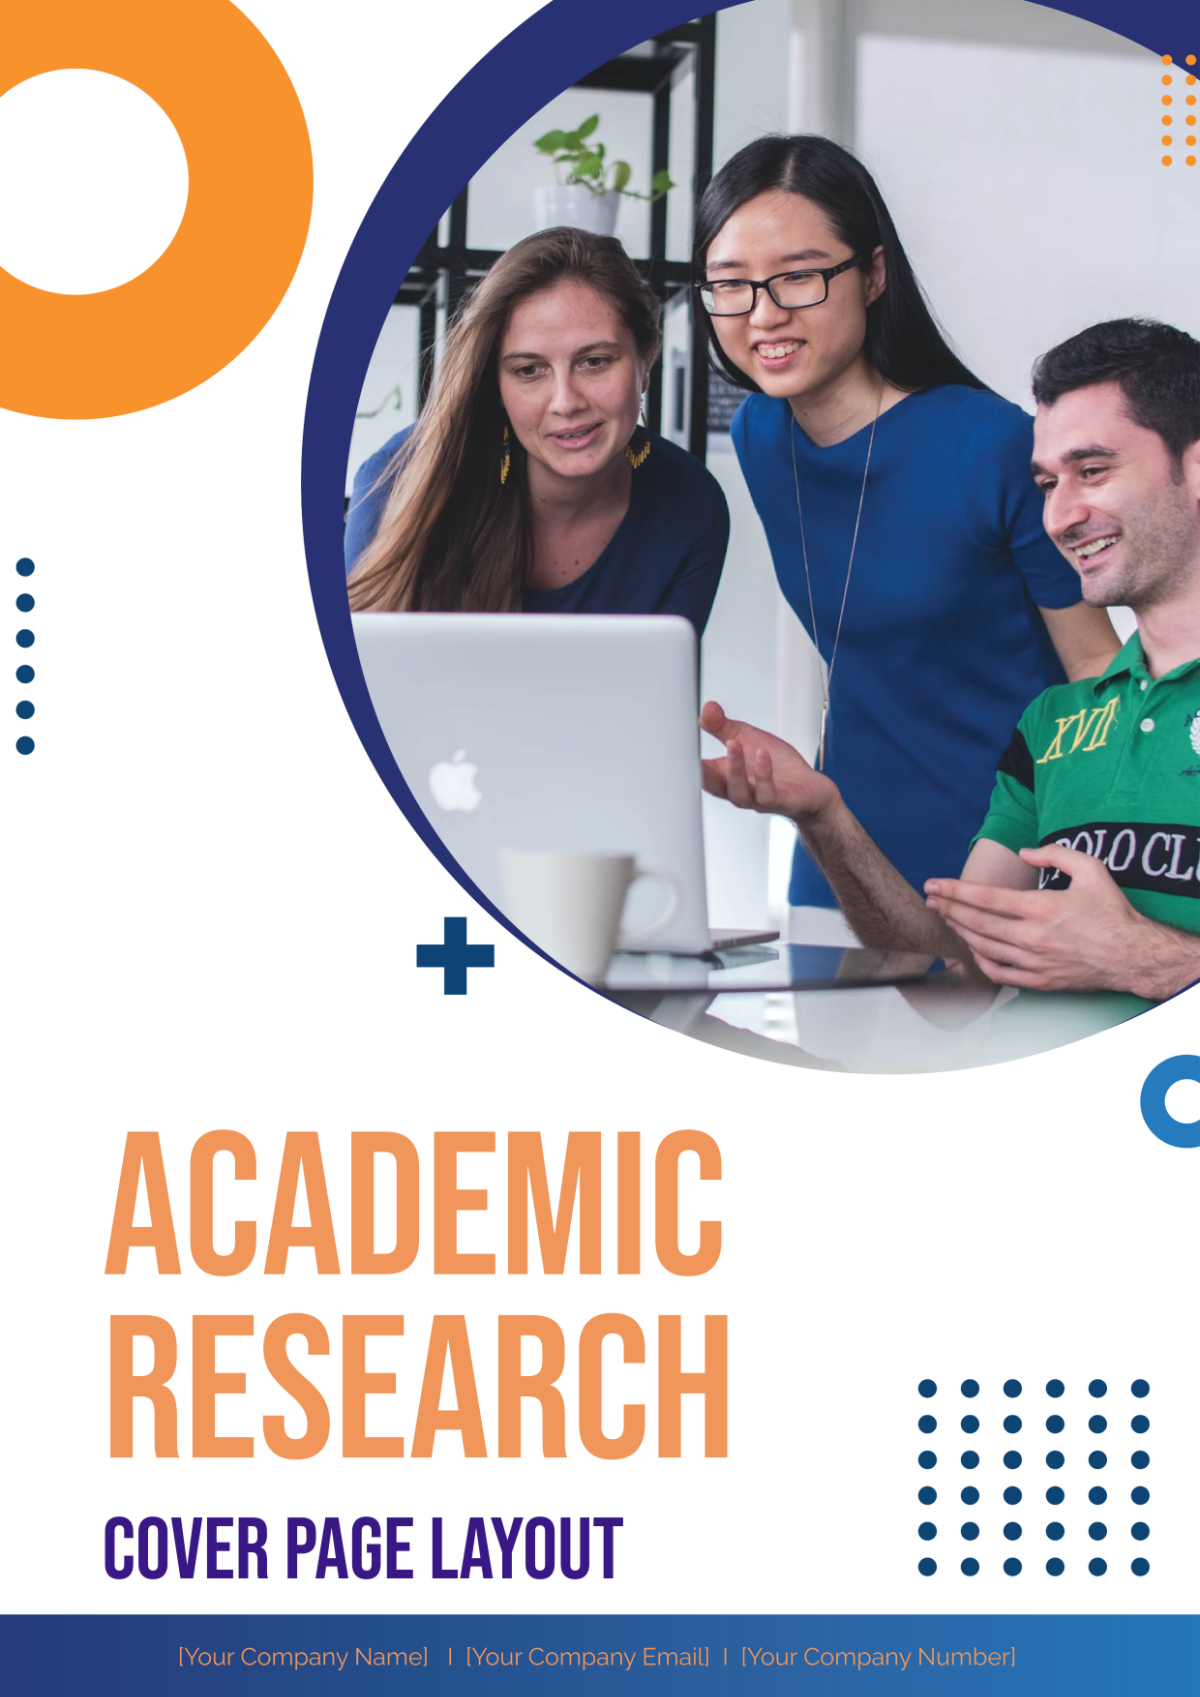 Academic Research Cover Page Layout